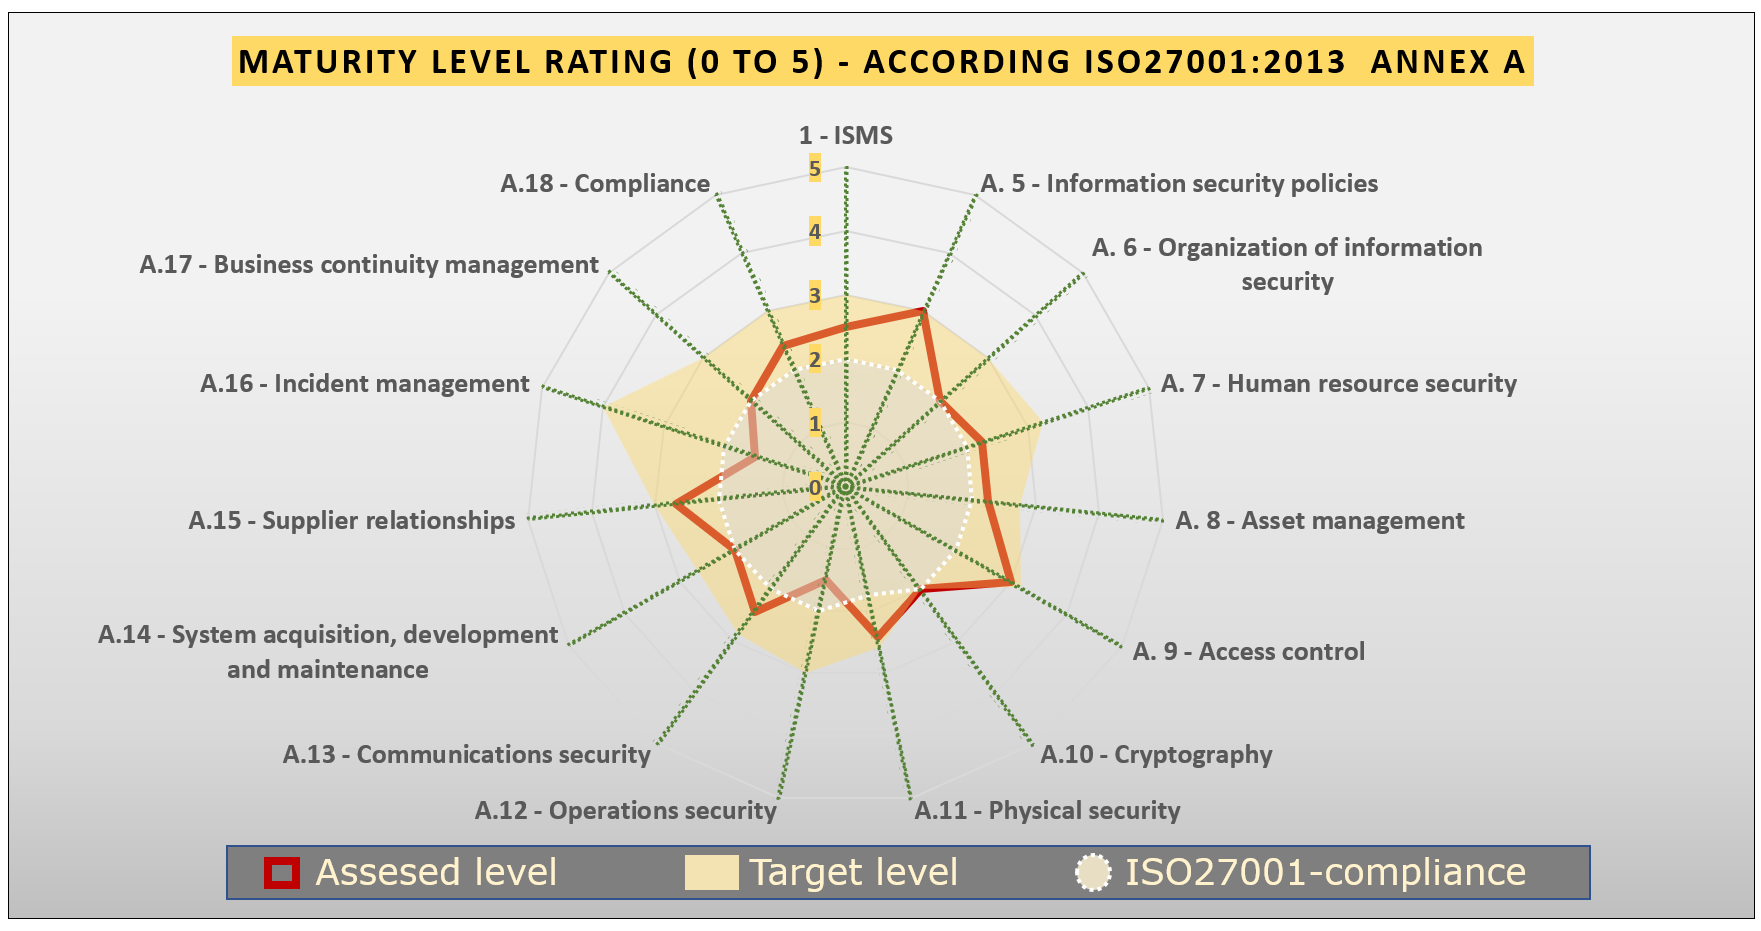 Image: Network diagram with example of a maturity assessment according to ISO27001:2013 Annex A